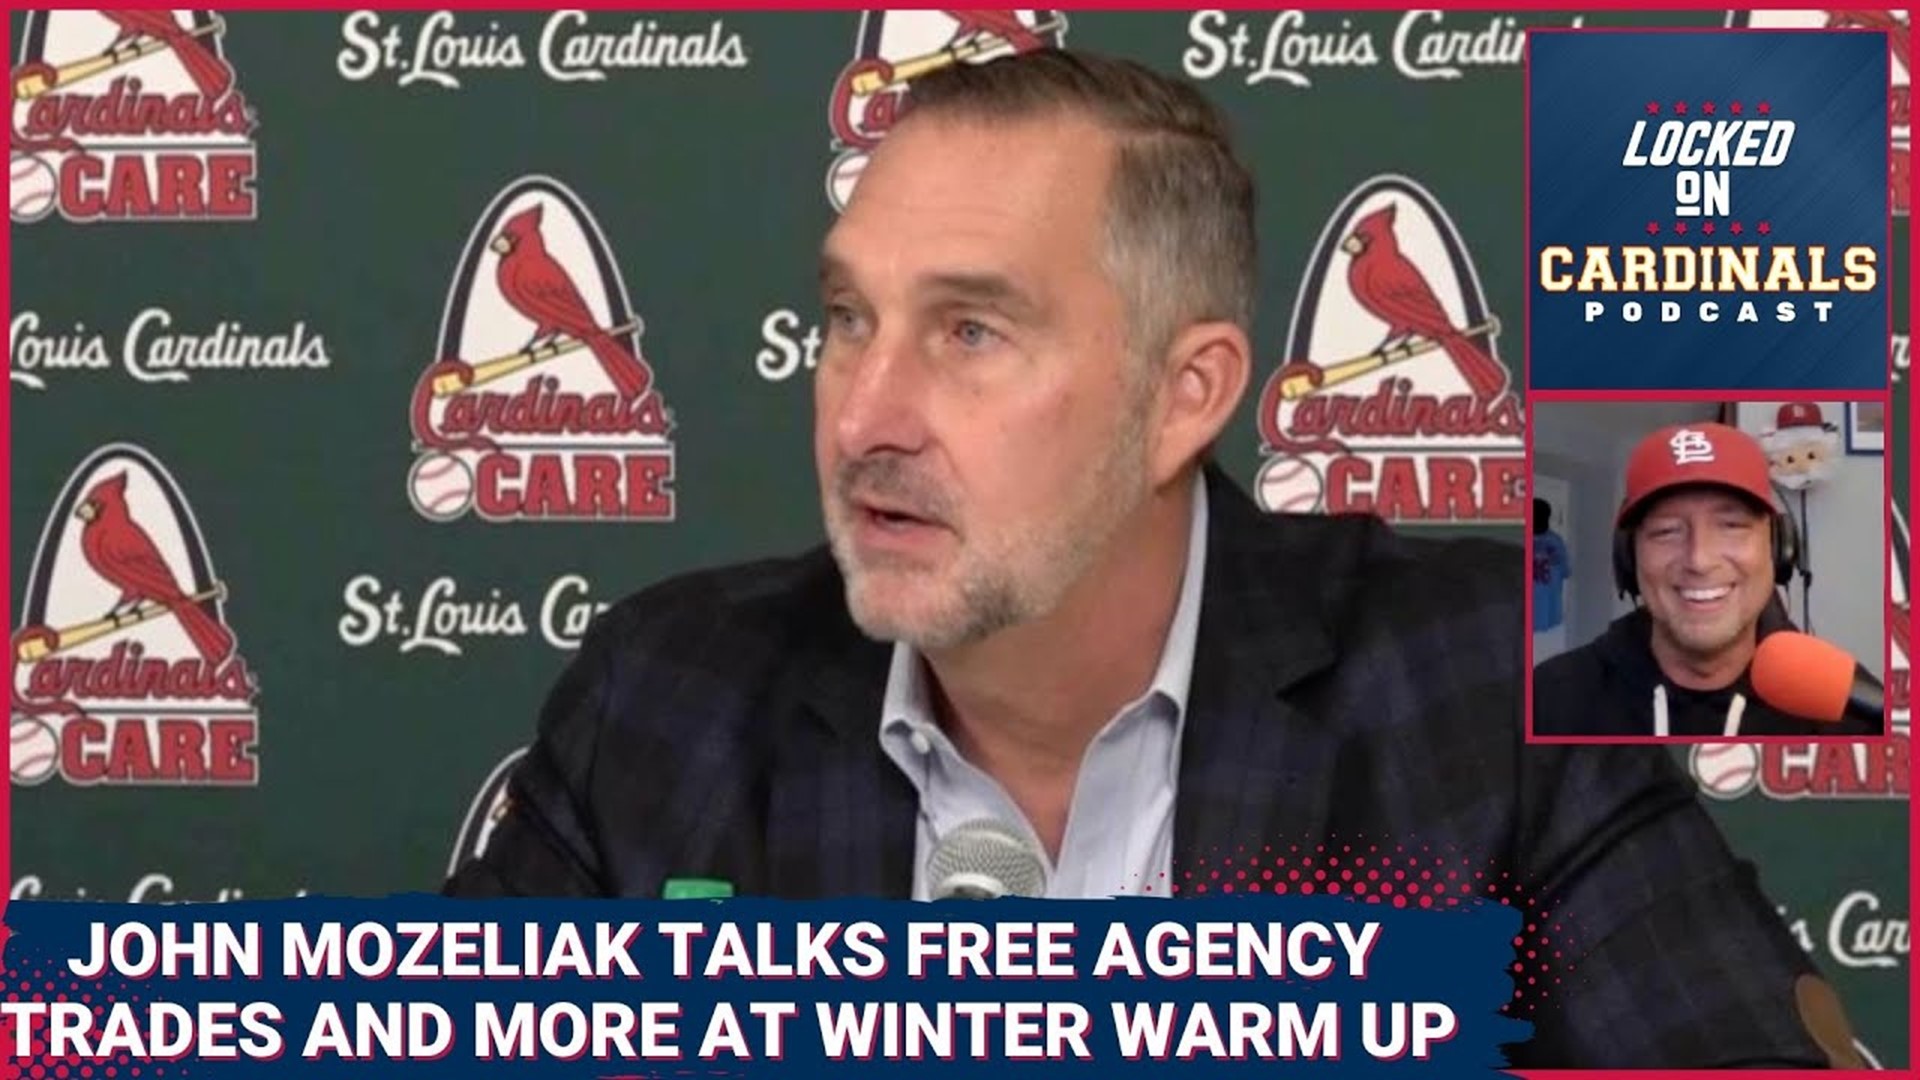 Mozeliak spoke at the Winter Warm Up. The St. Louis Cardinals avoided arbitration with players including Tommy Edman, Jack Flaherty, and Jordan Montgomery.